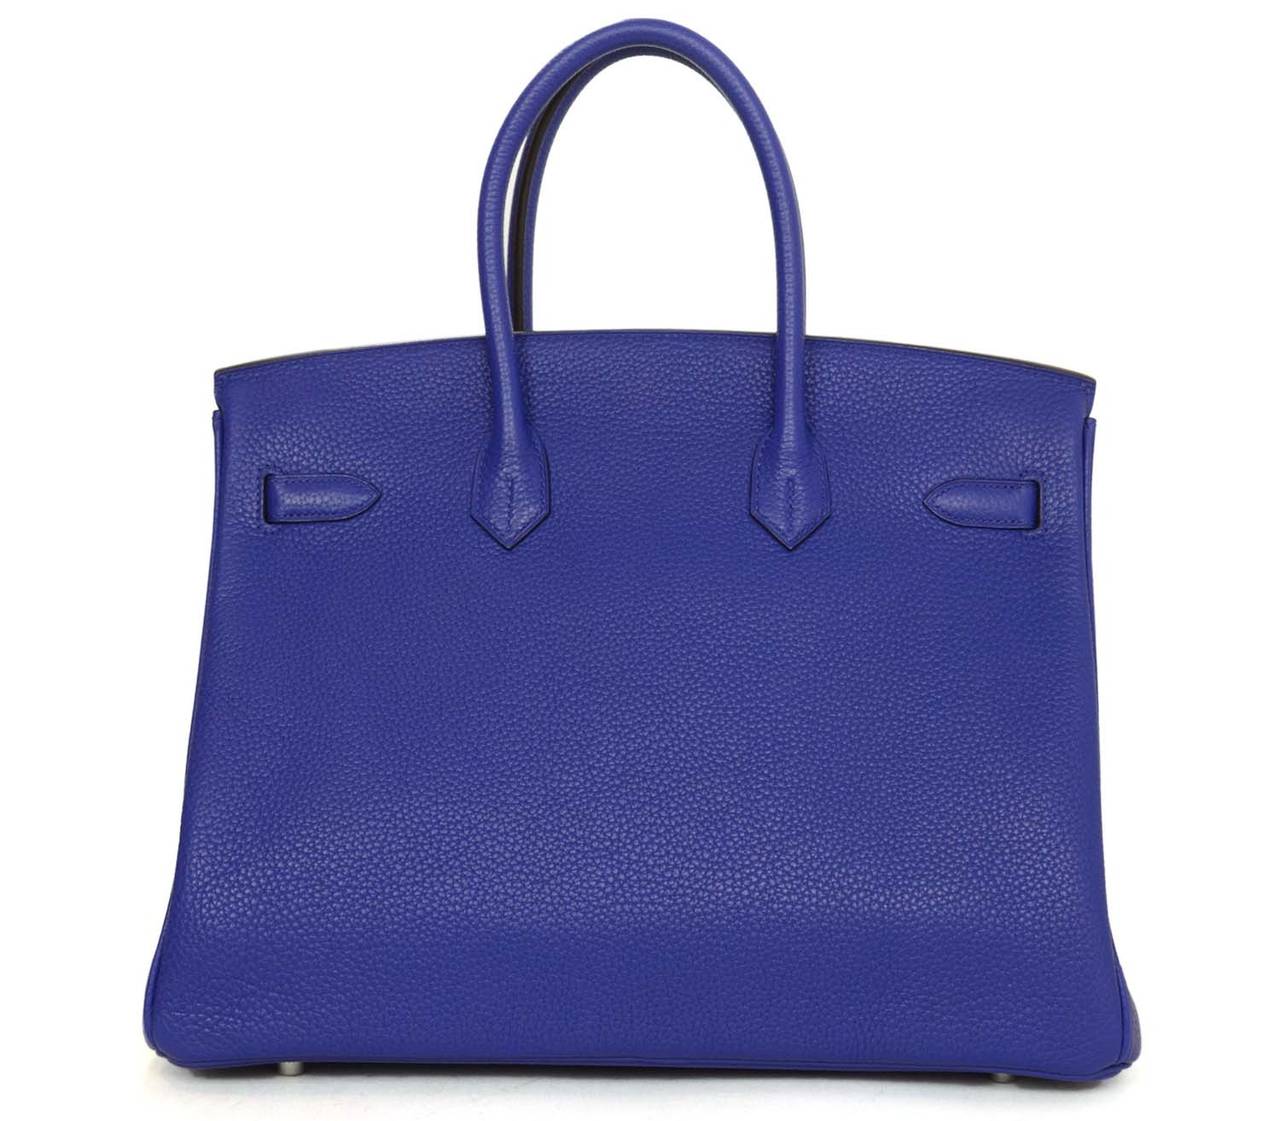 Hermes NIB 35cm Togo Leather Blue Electric Birkin

-Made in: France
-Year of Production: 2014
-Color: 